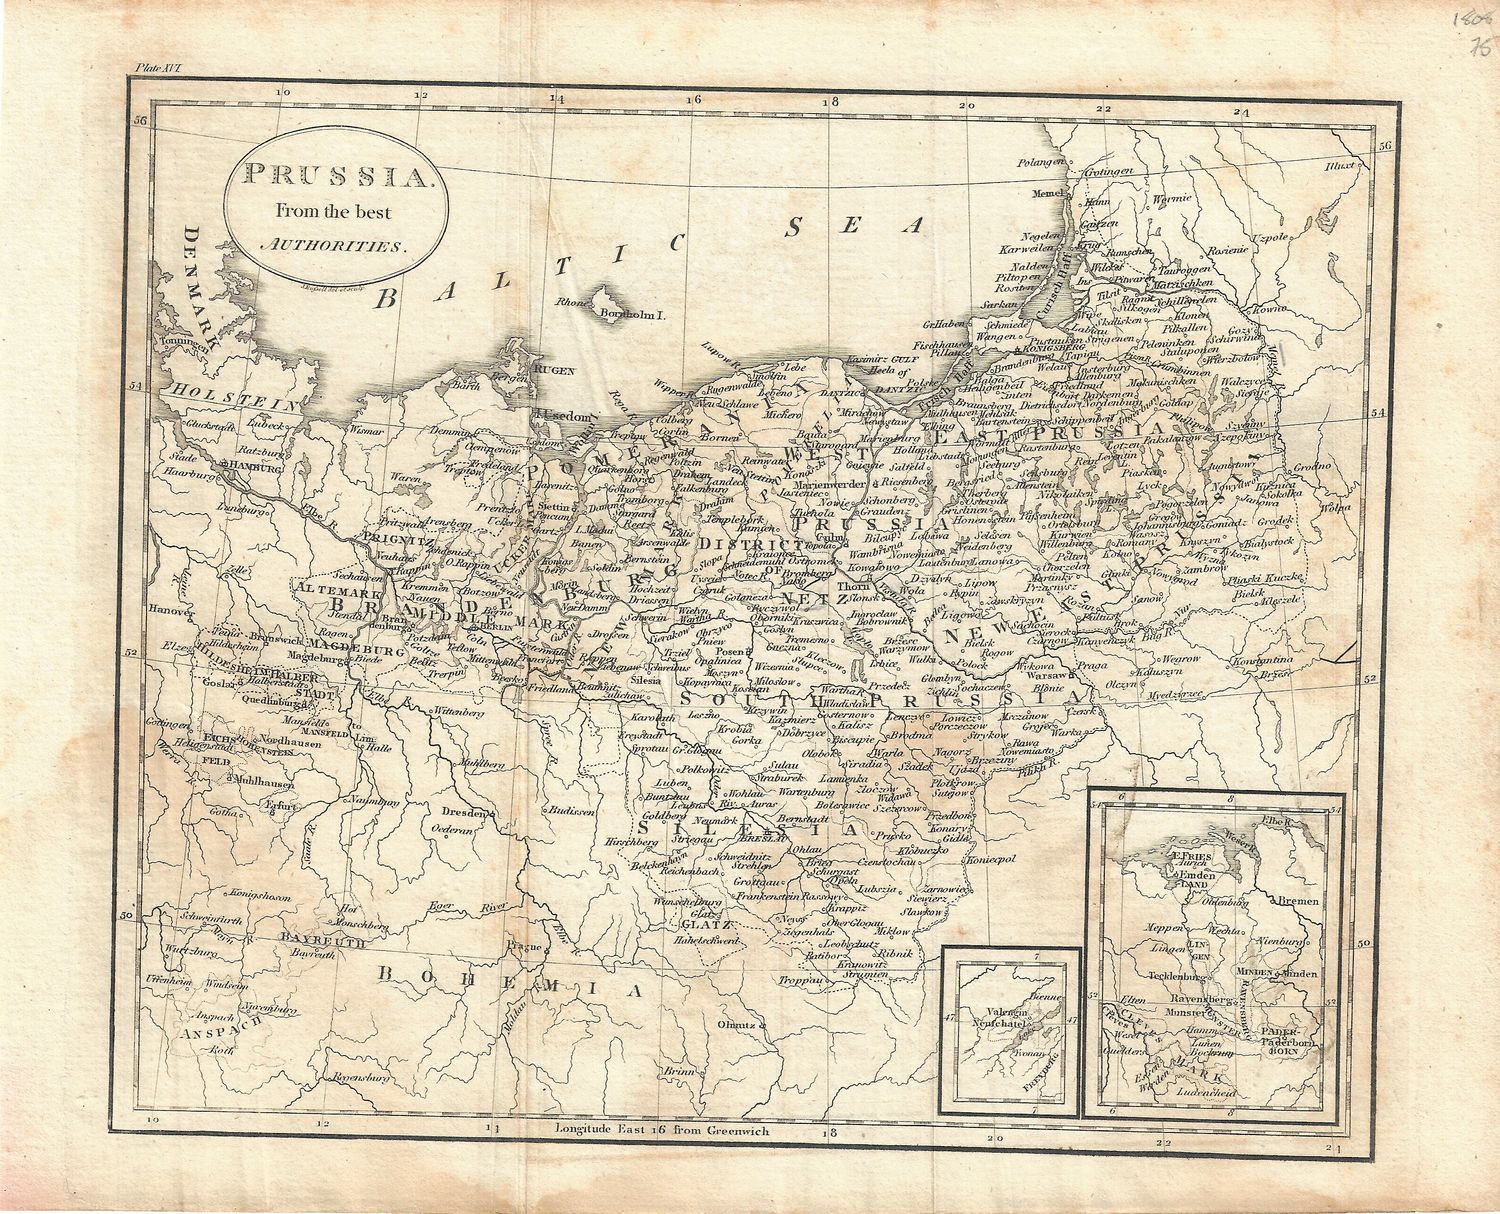 1808 Map of Prussia from the best authorities